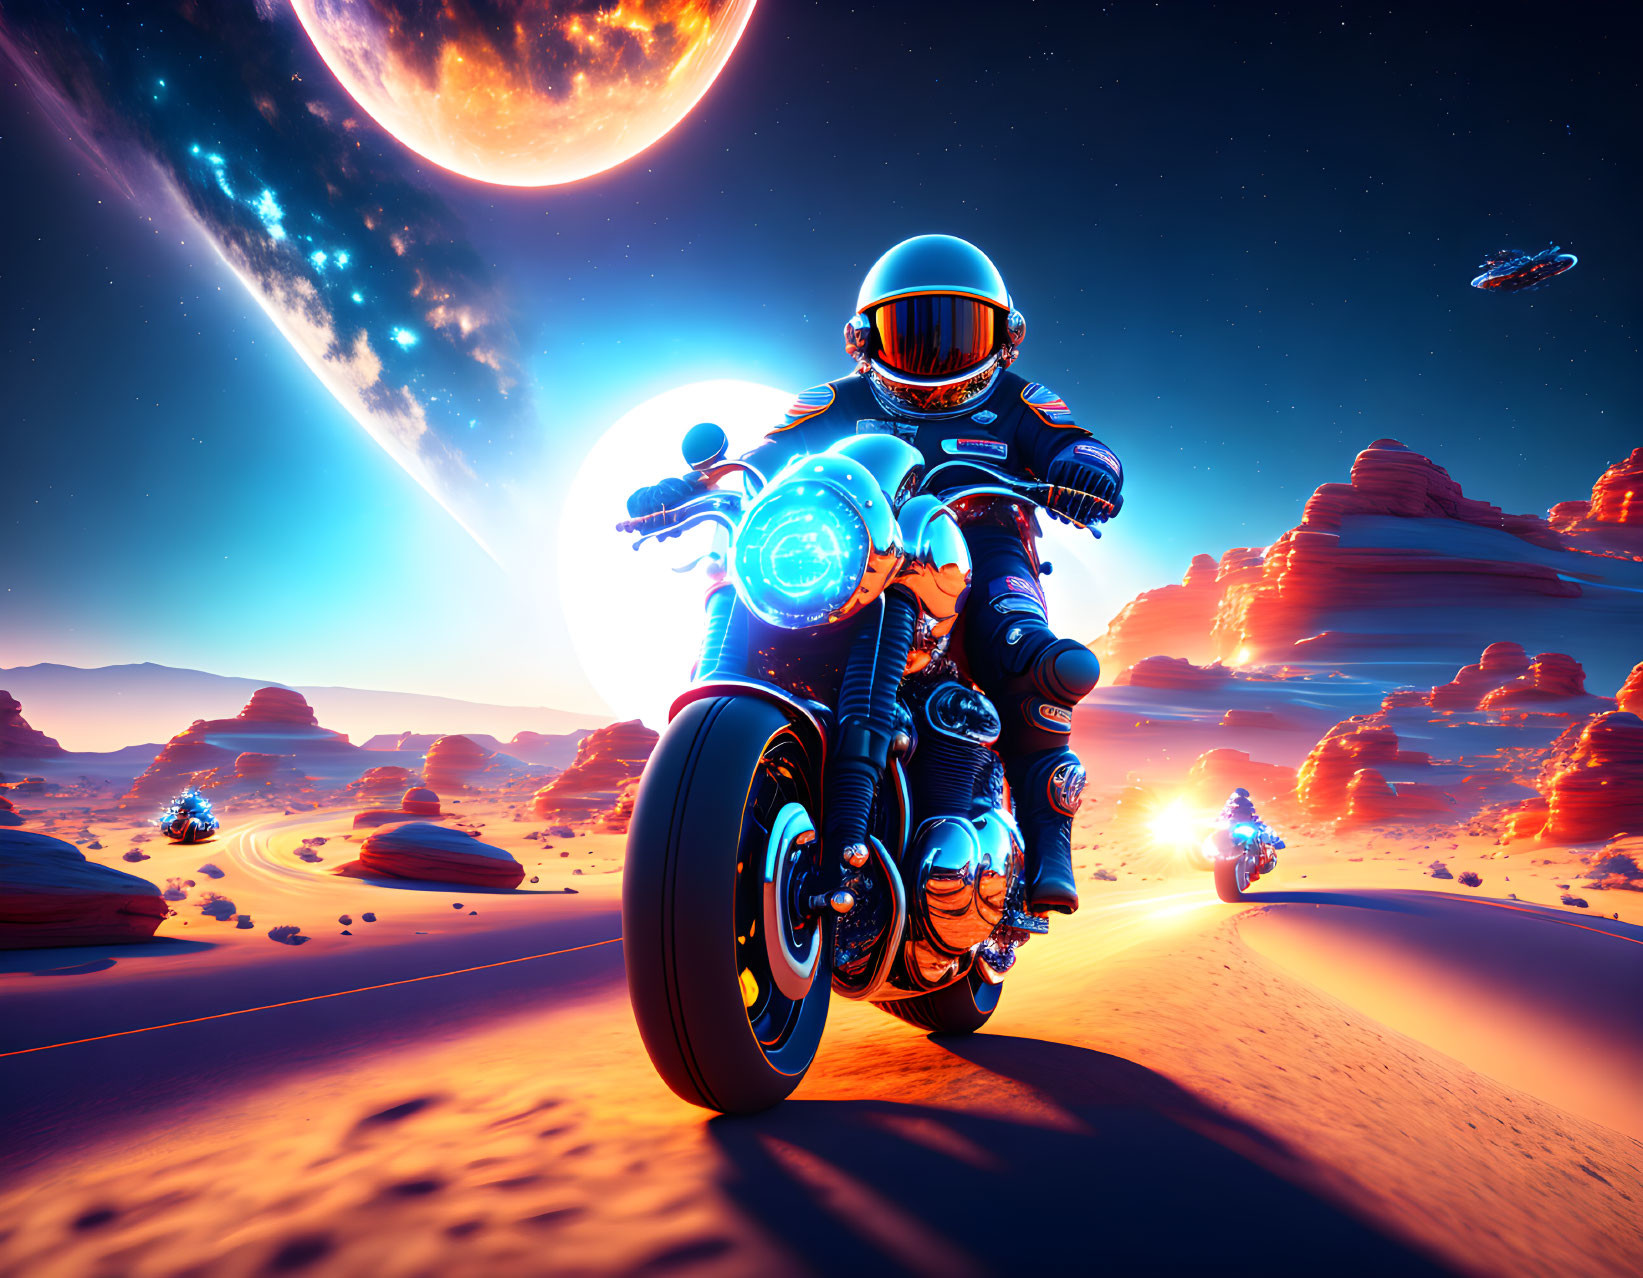 Astronaut on motorcycle in alien desert with red rocks and moon.